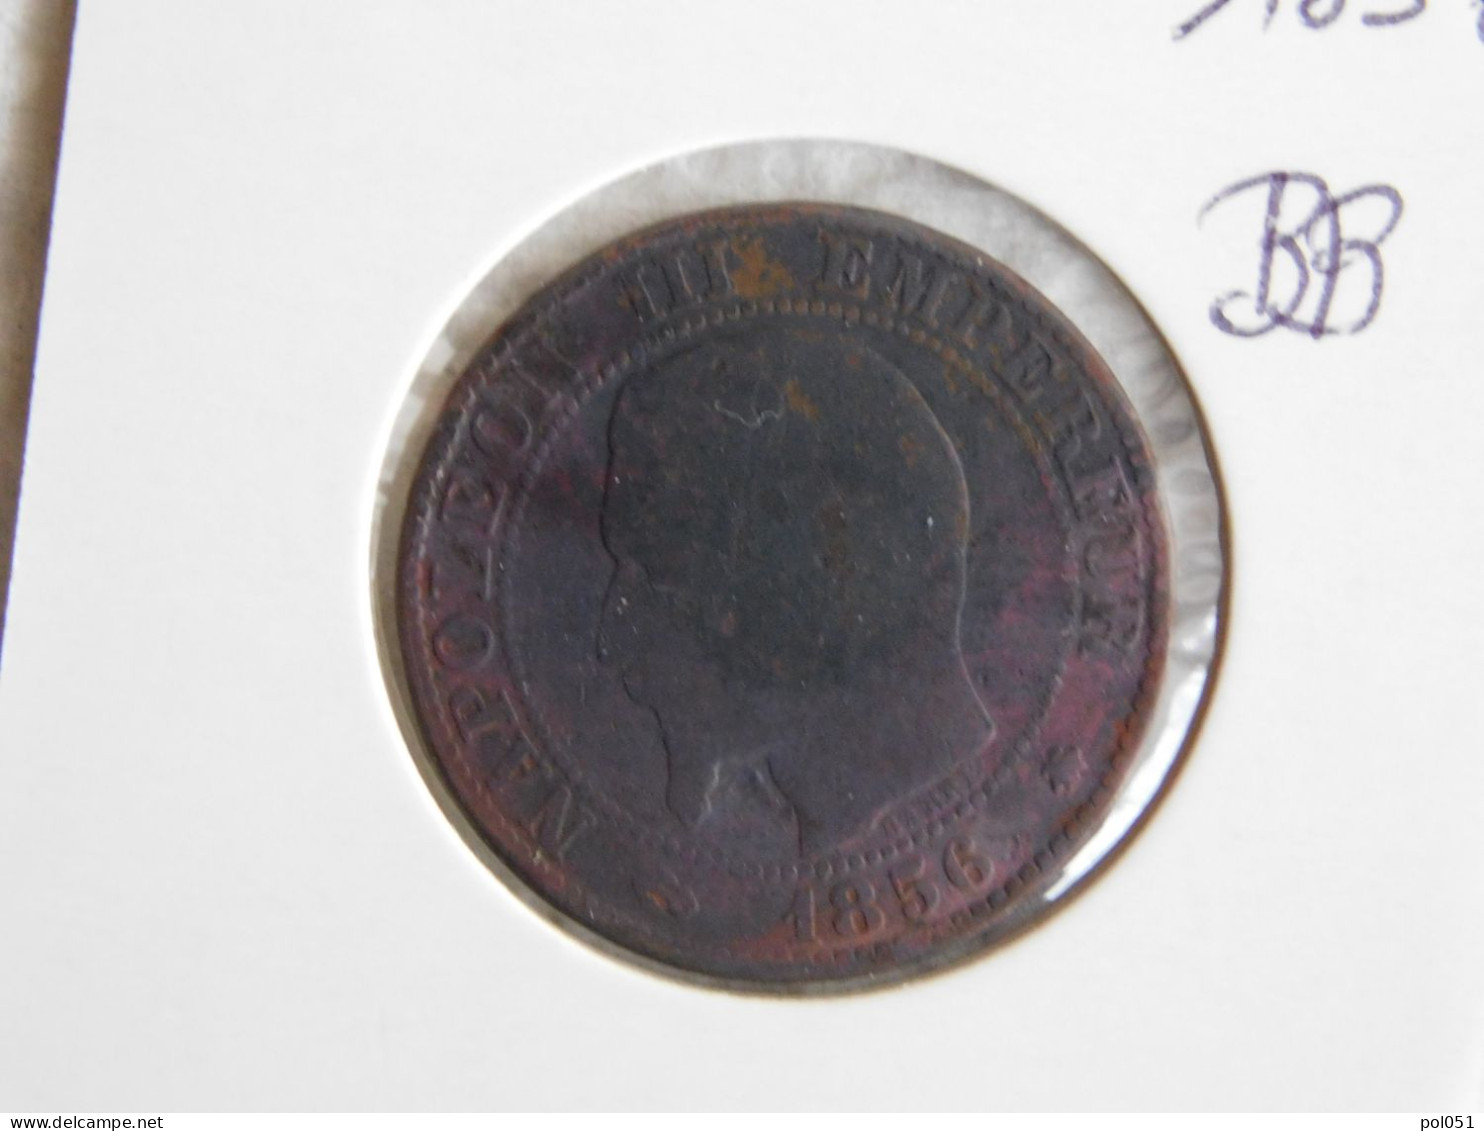 France 5 Centimes 1856 BB (111) - 5 Centimes